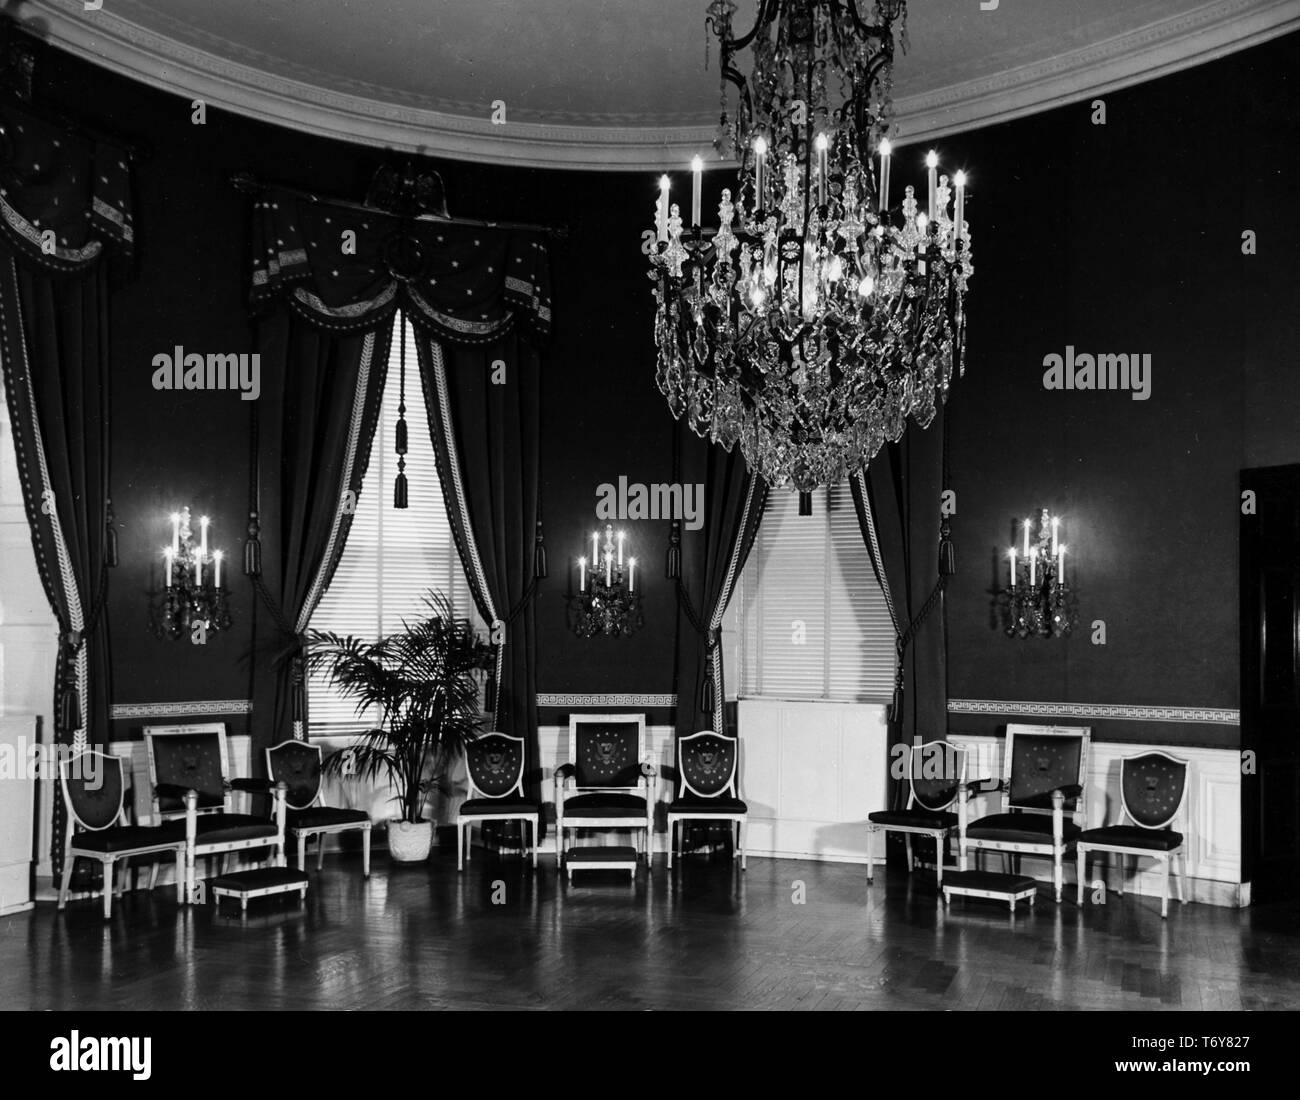 The White House Blue Room, with candle sconces, a crystal chandelier and chairs lining the apse, Washington, District of Columbia, November 13, 1947. Image courtesy National Archives. () Stock Photo